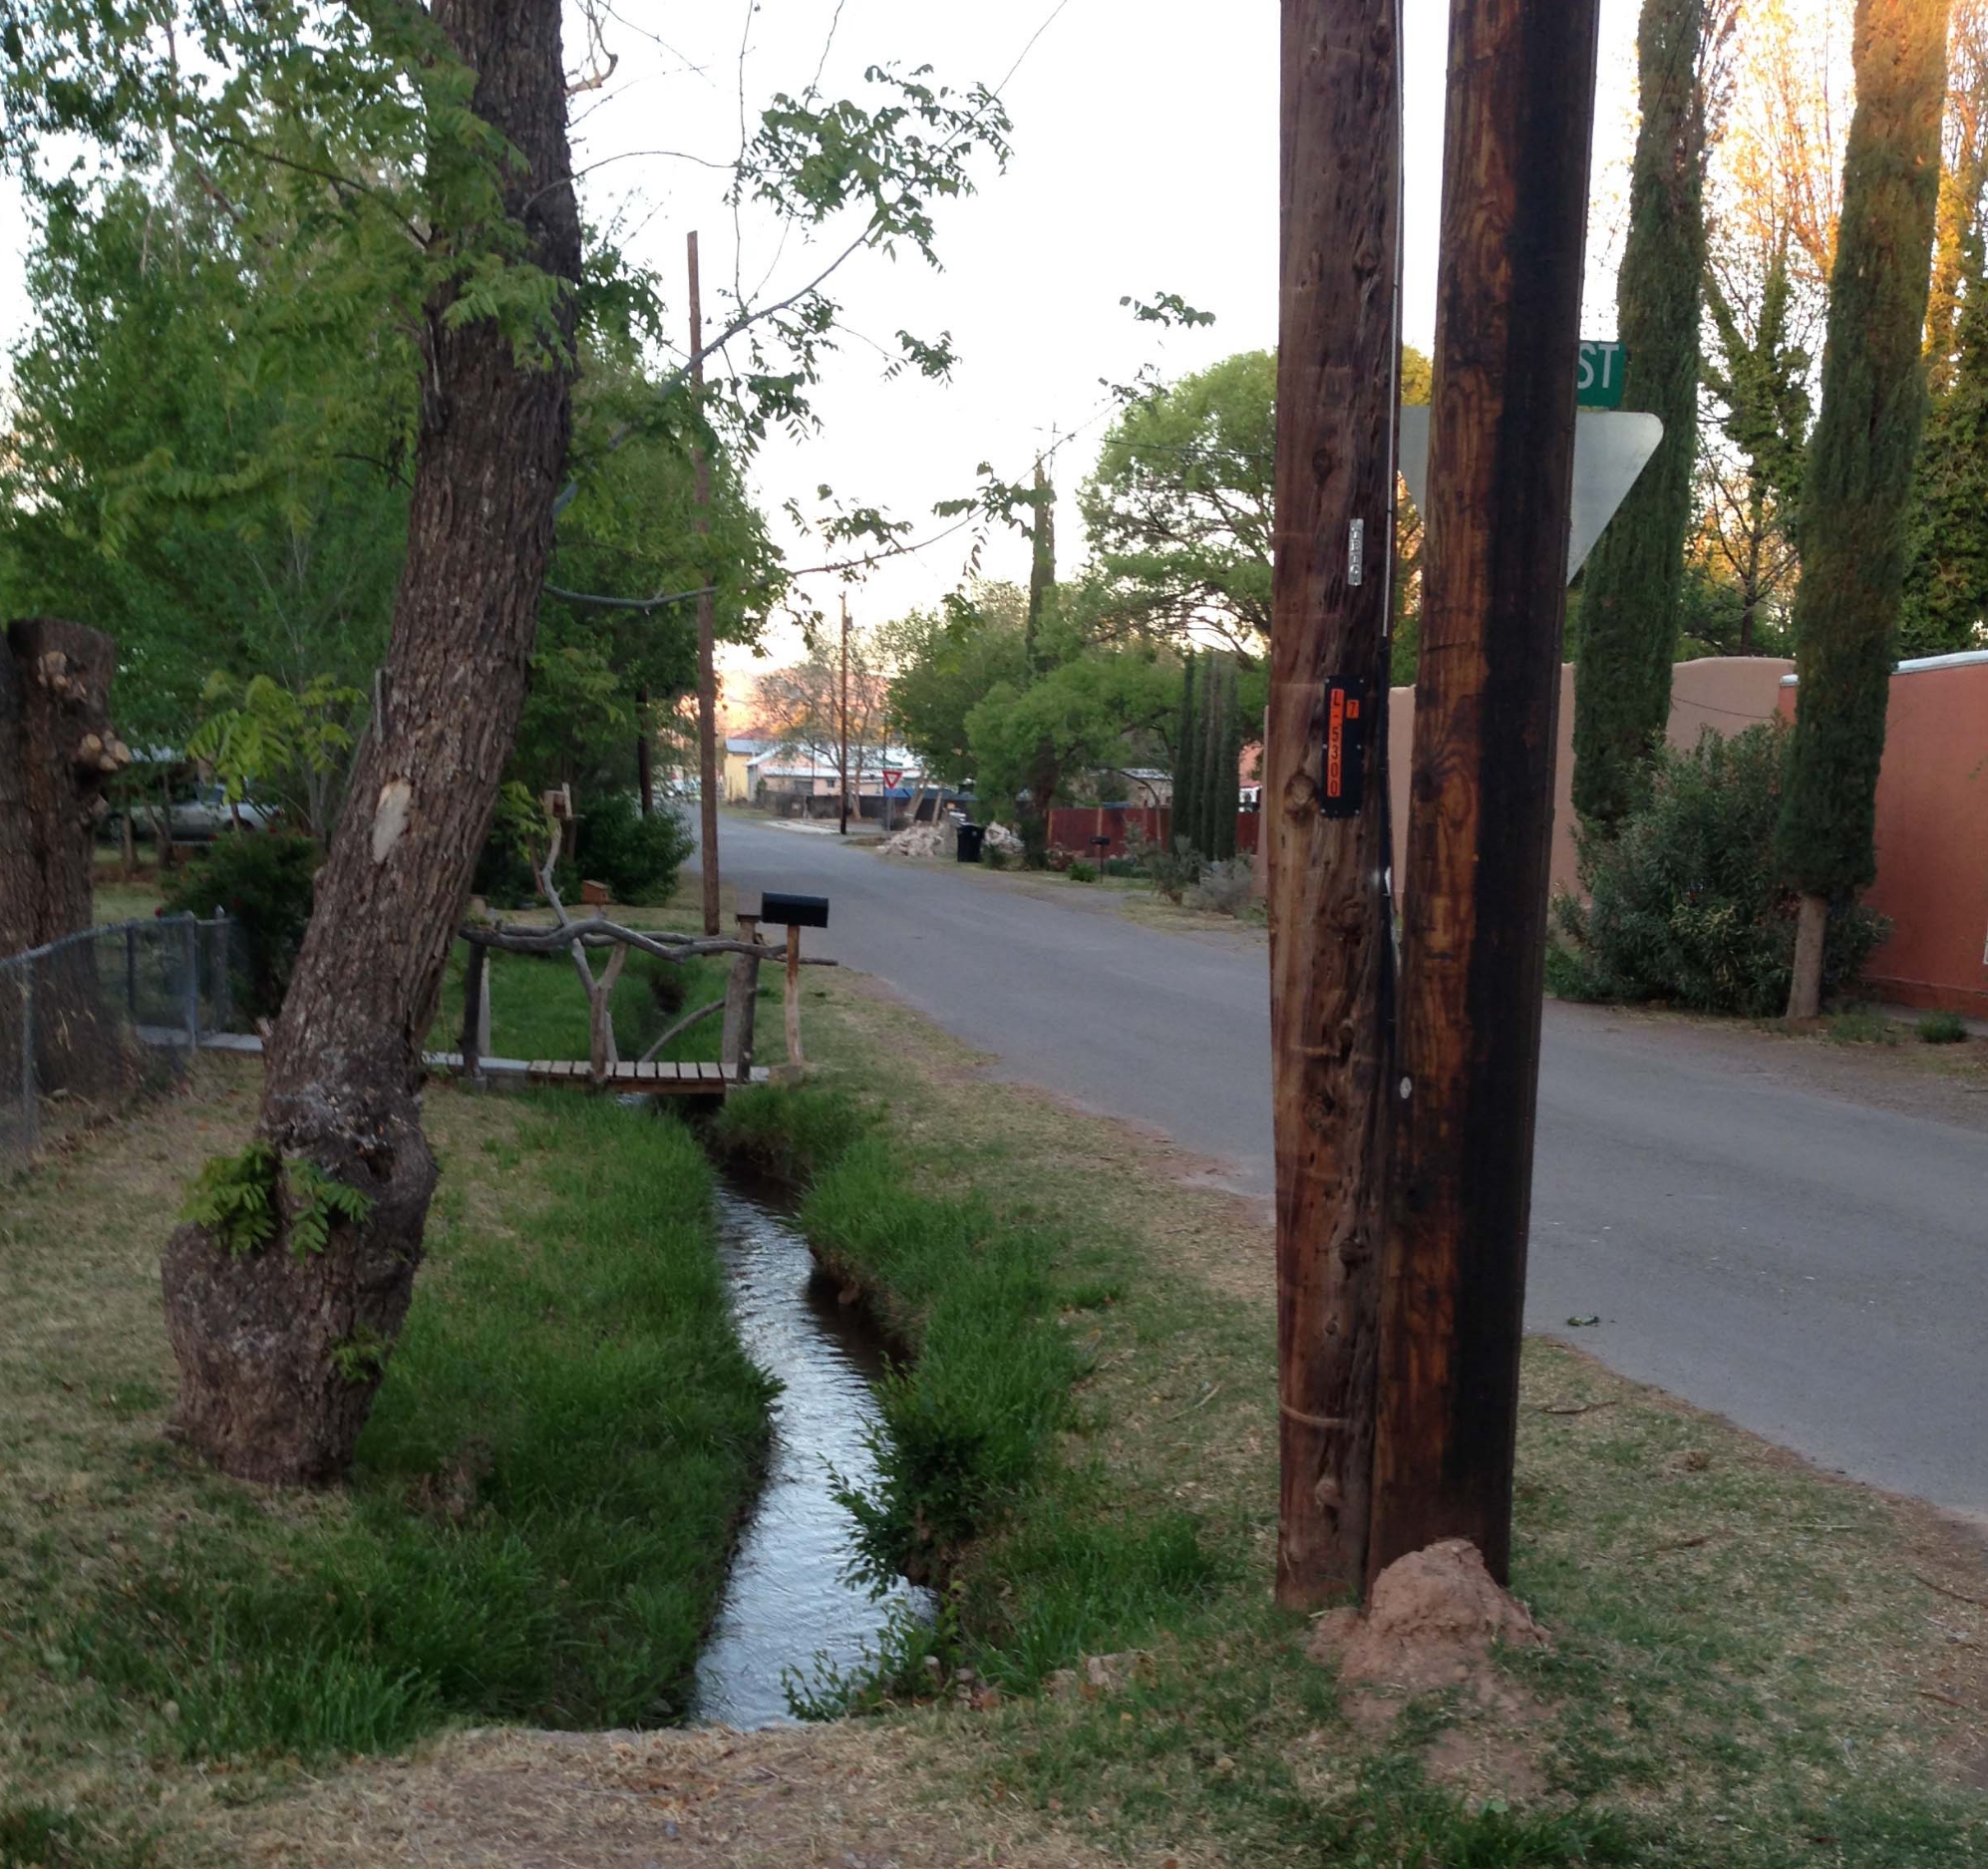 The acequia water system